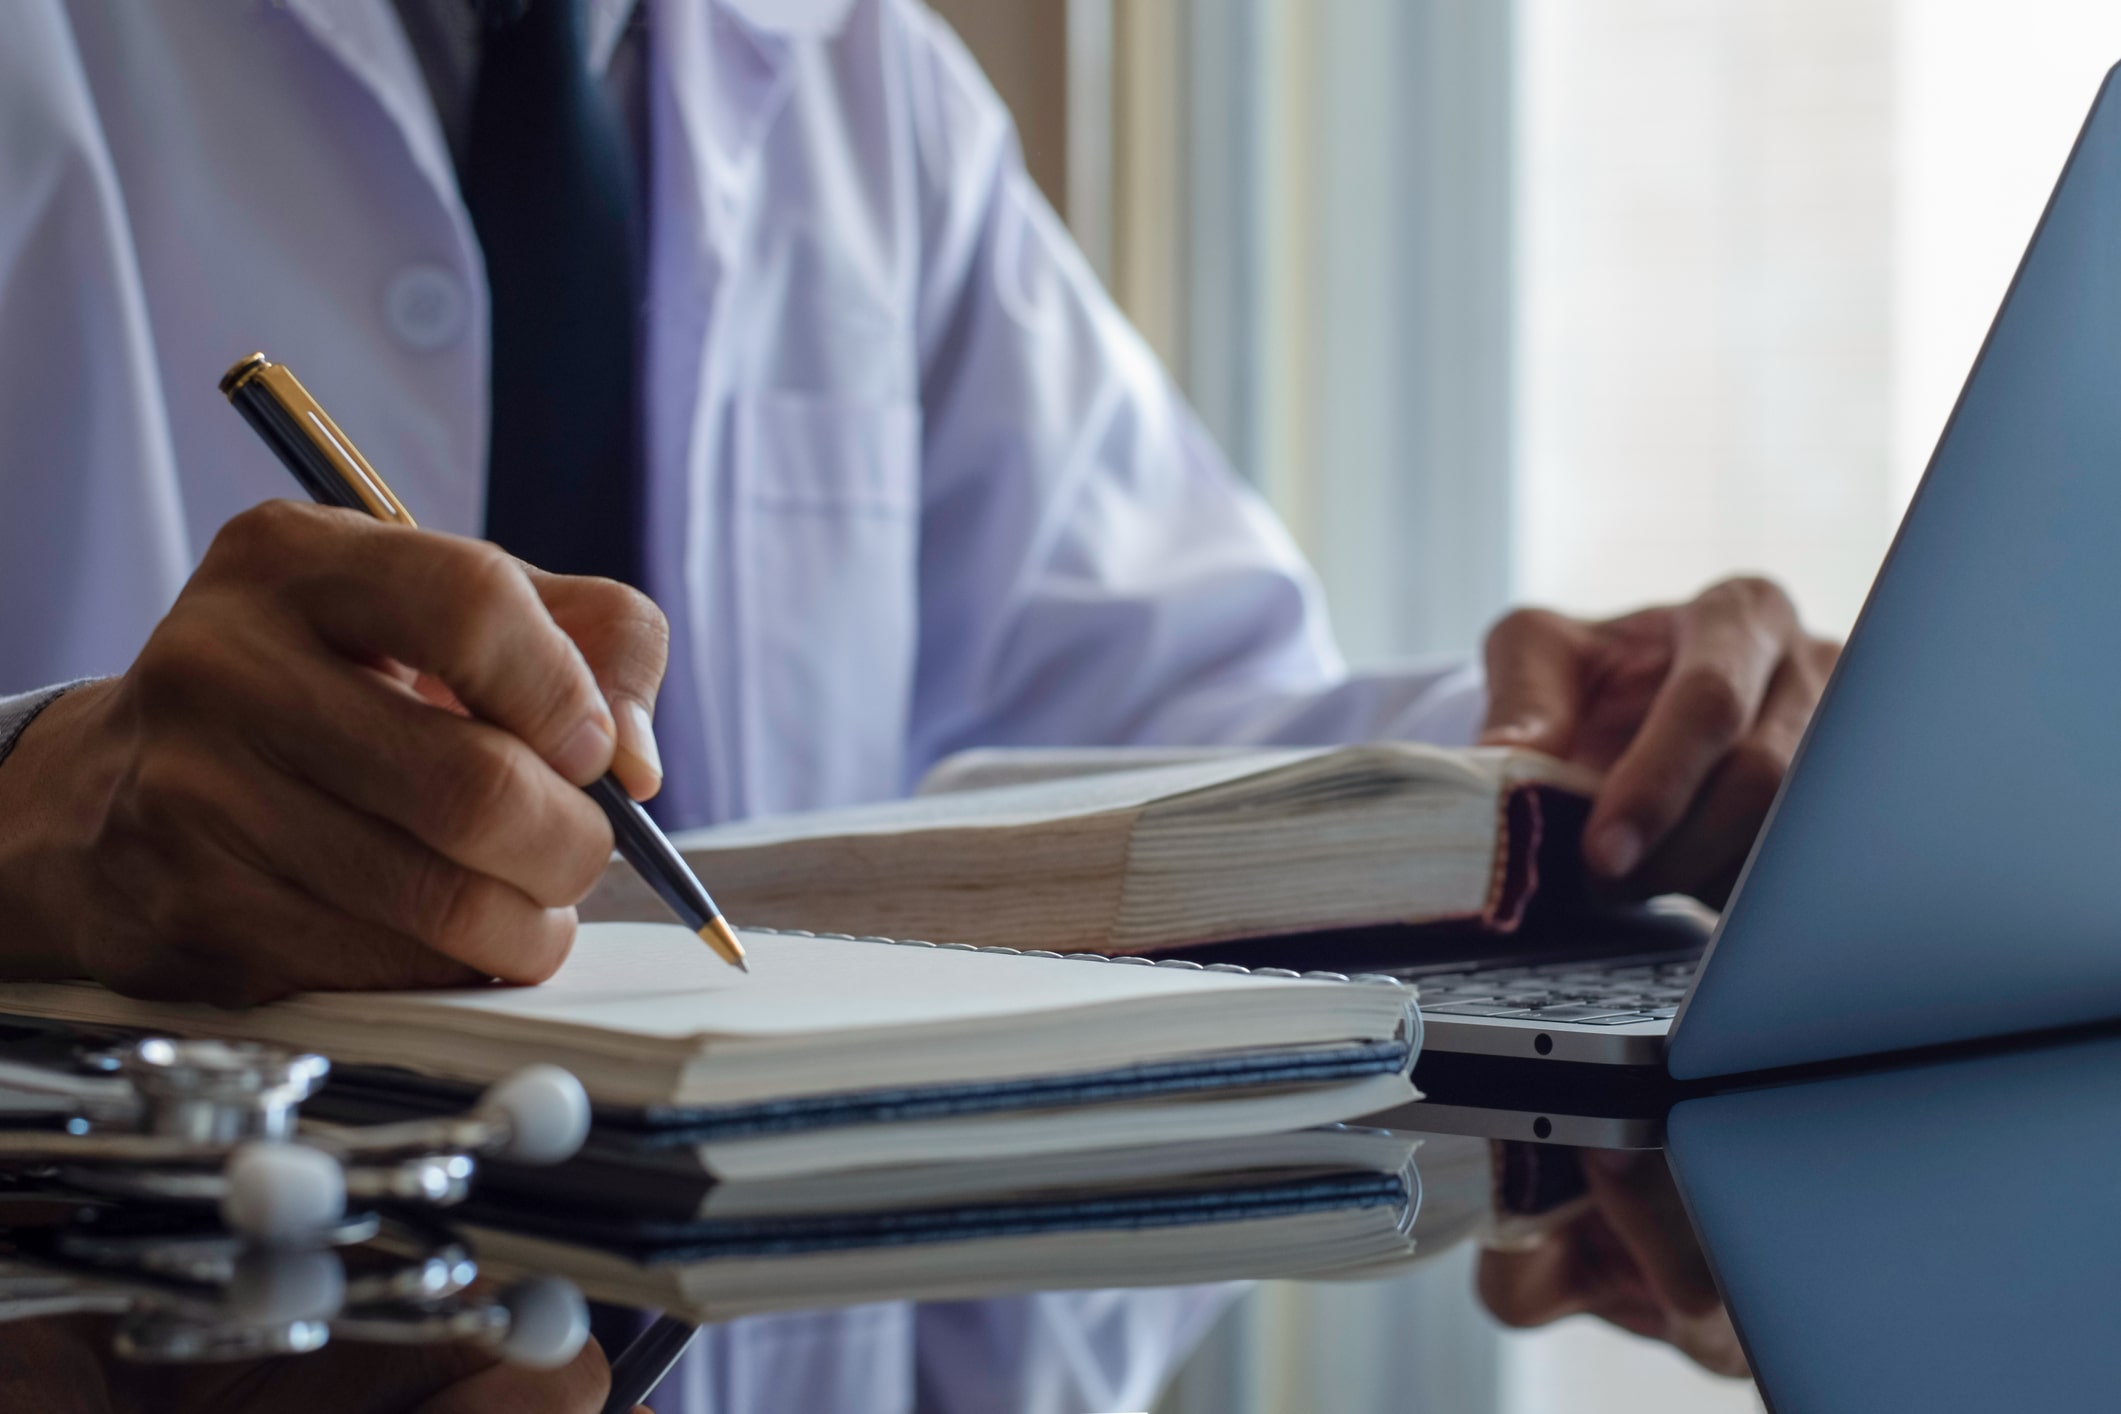 Medical Billing in Healthcare: Understanding In-House vs Outsourced